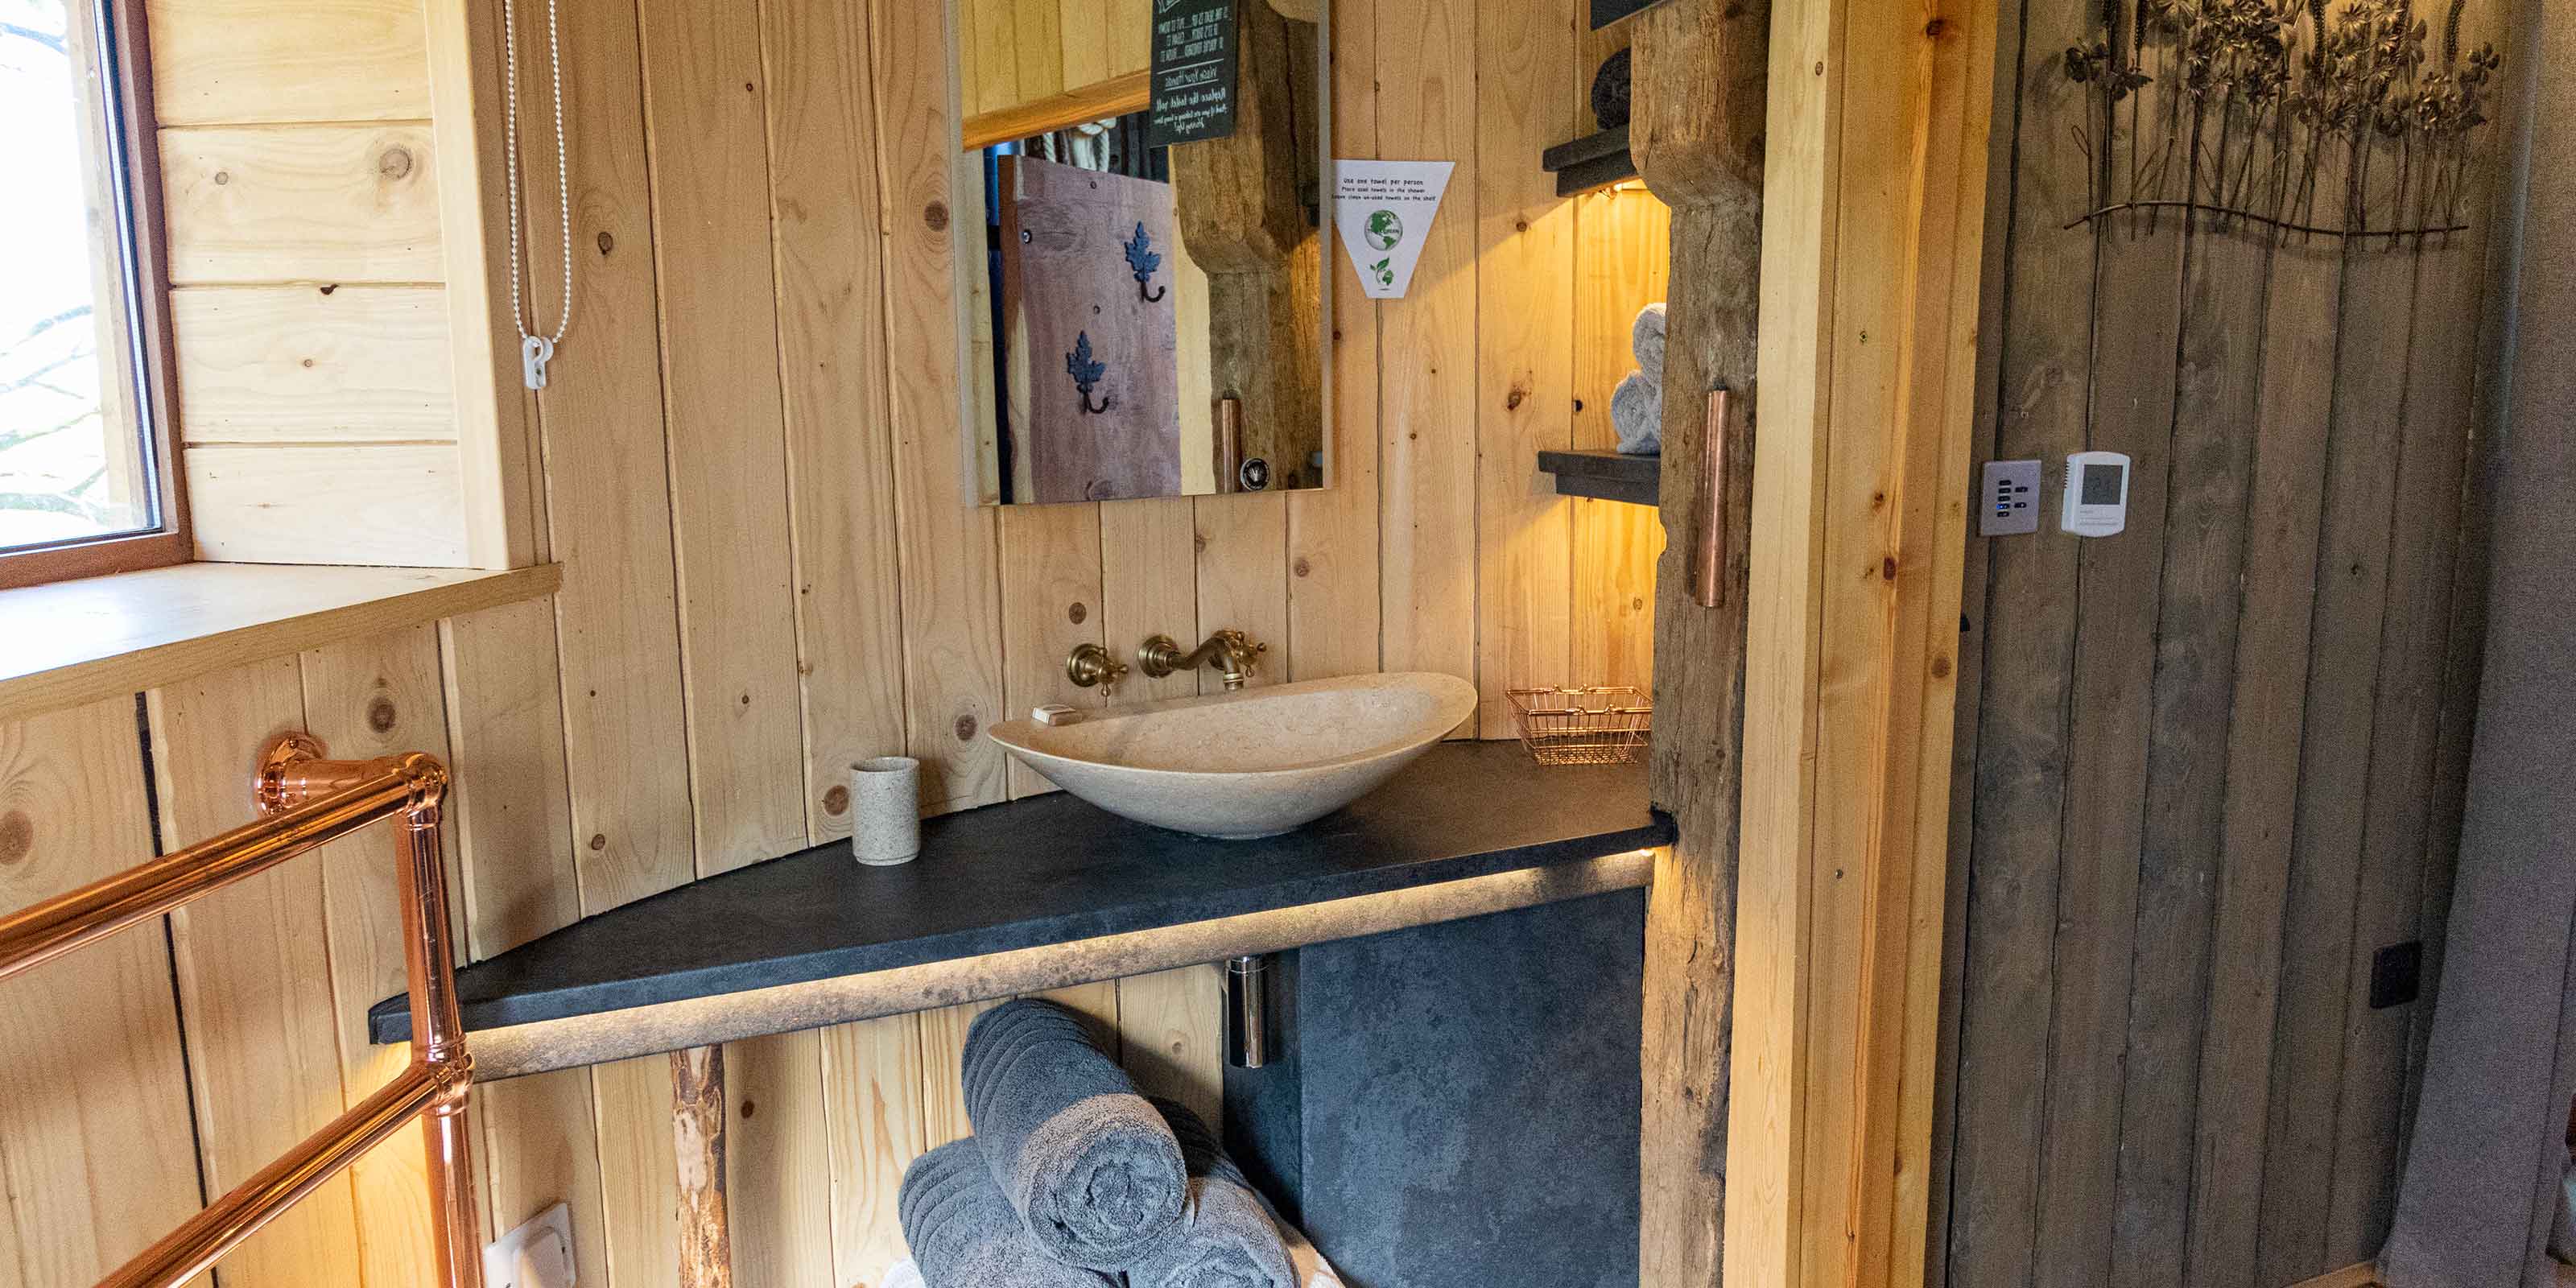 Bathroom of our family holiday Yorkshire treehouse breaks. Perfectly situated for treehouse breaks & York glamping hot tub. 